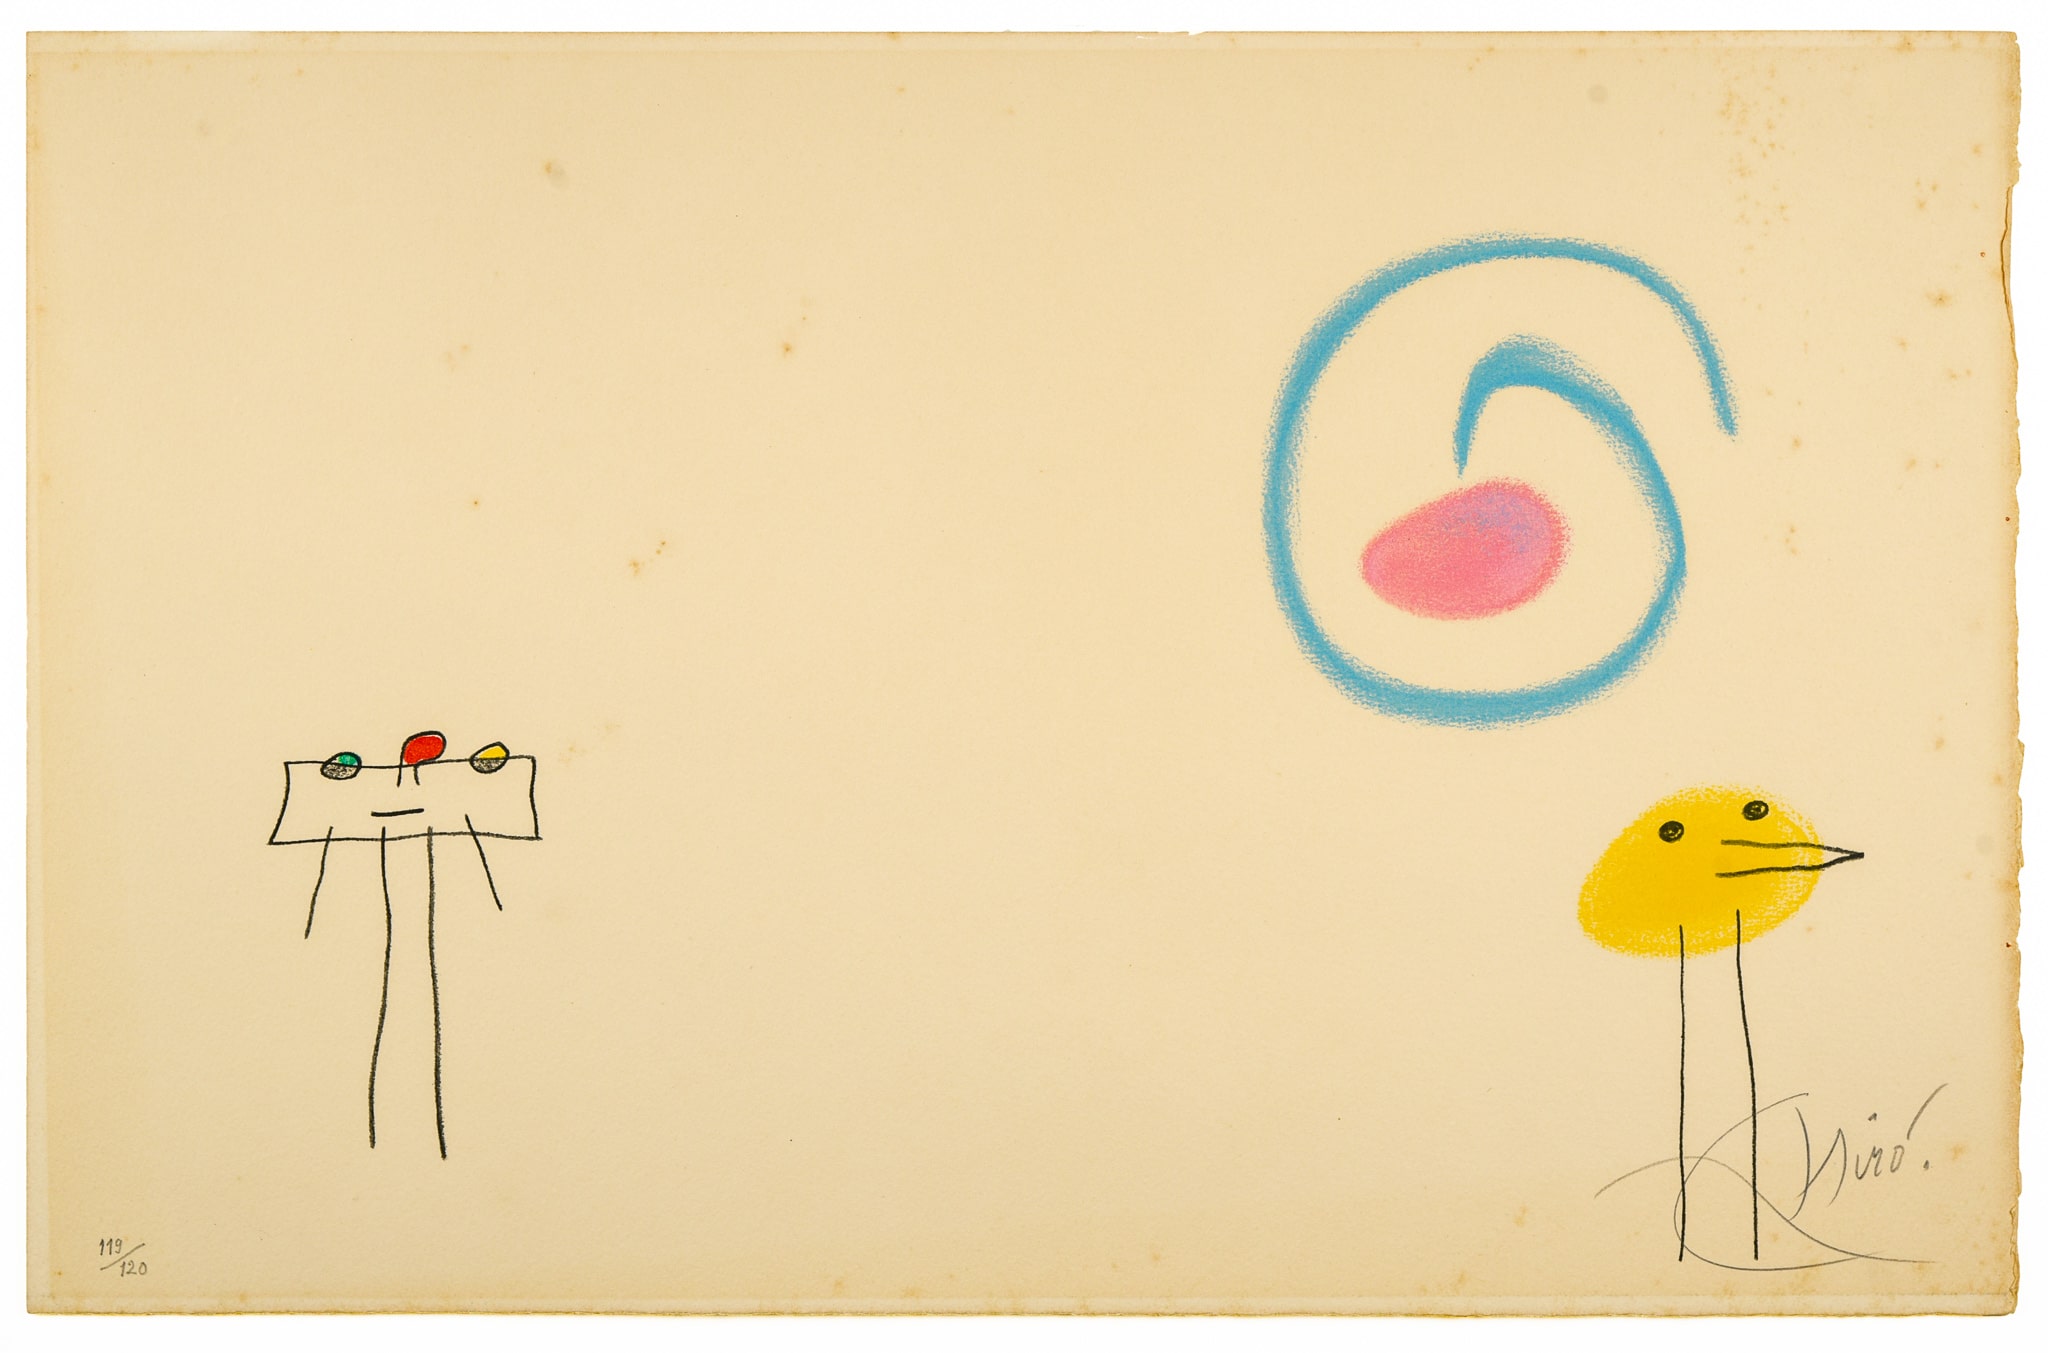 Joan Miró (1893-1983)
L’Englace d’Ubu, 1975
Color lithograph
13 x 20 inches
Edition 119 of 120
Accession Number 002.1